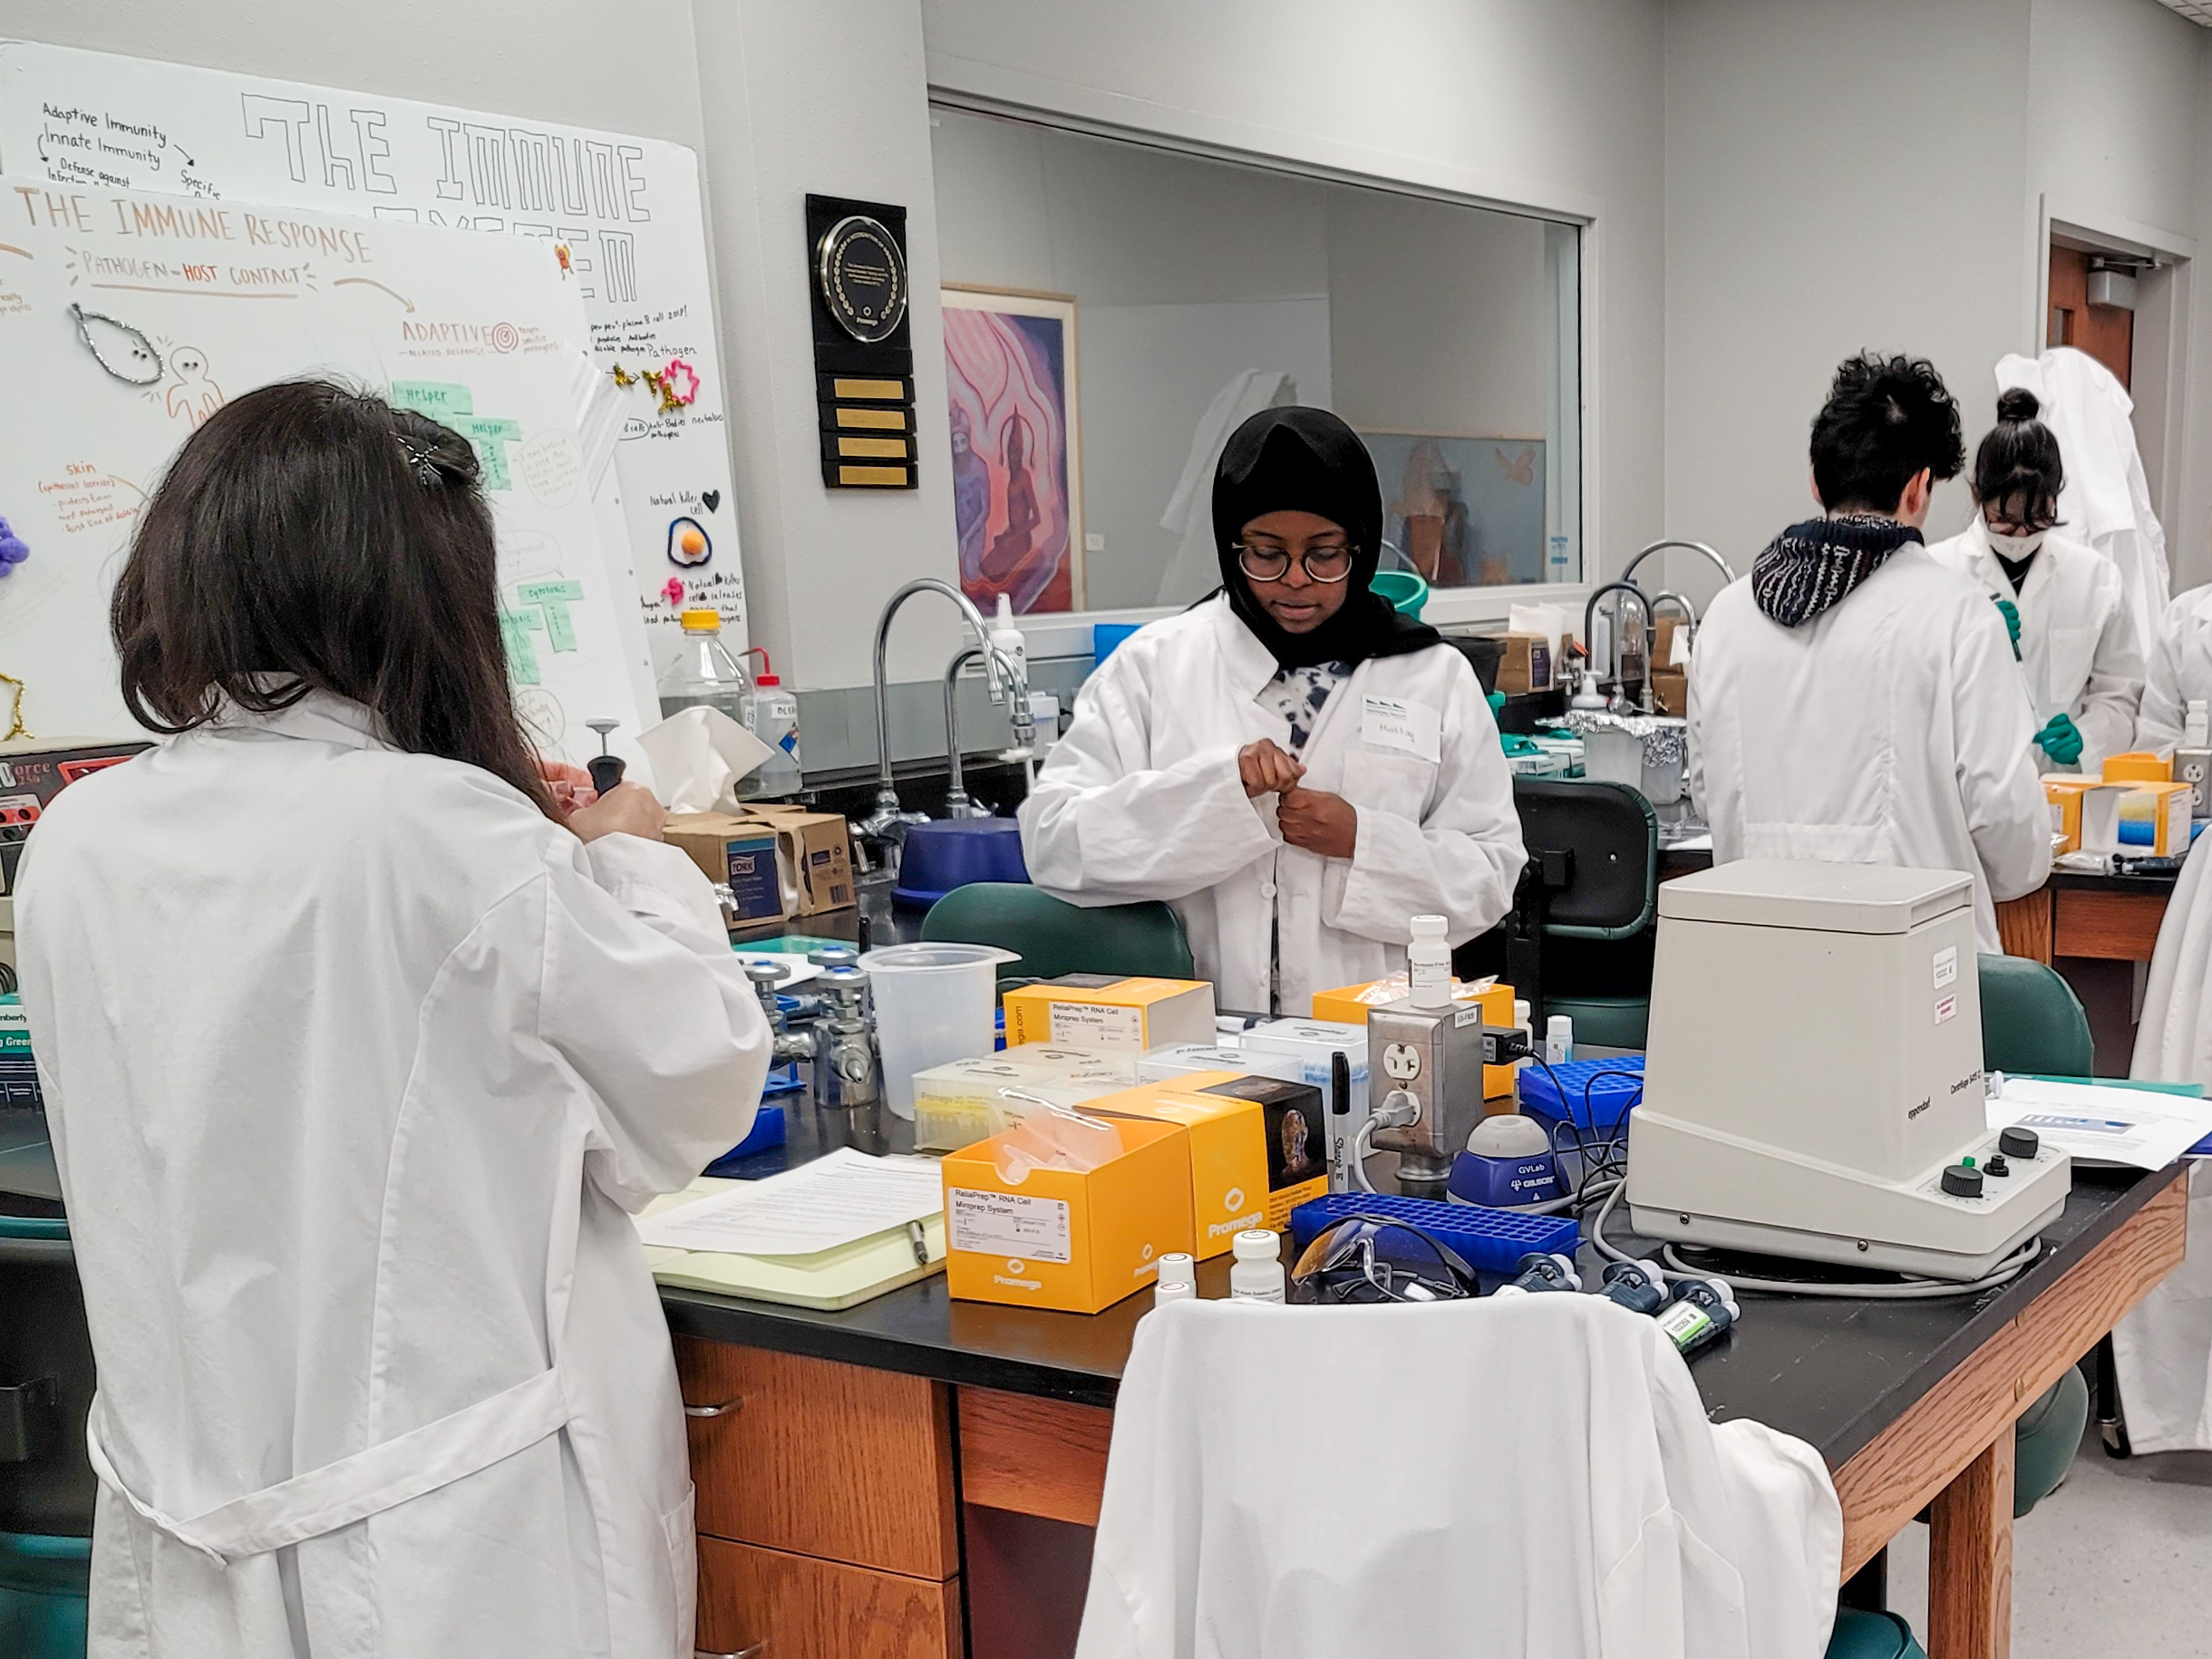 Four students wearing white lab coats work at science lab tables.